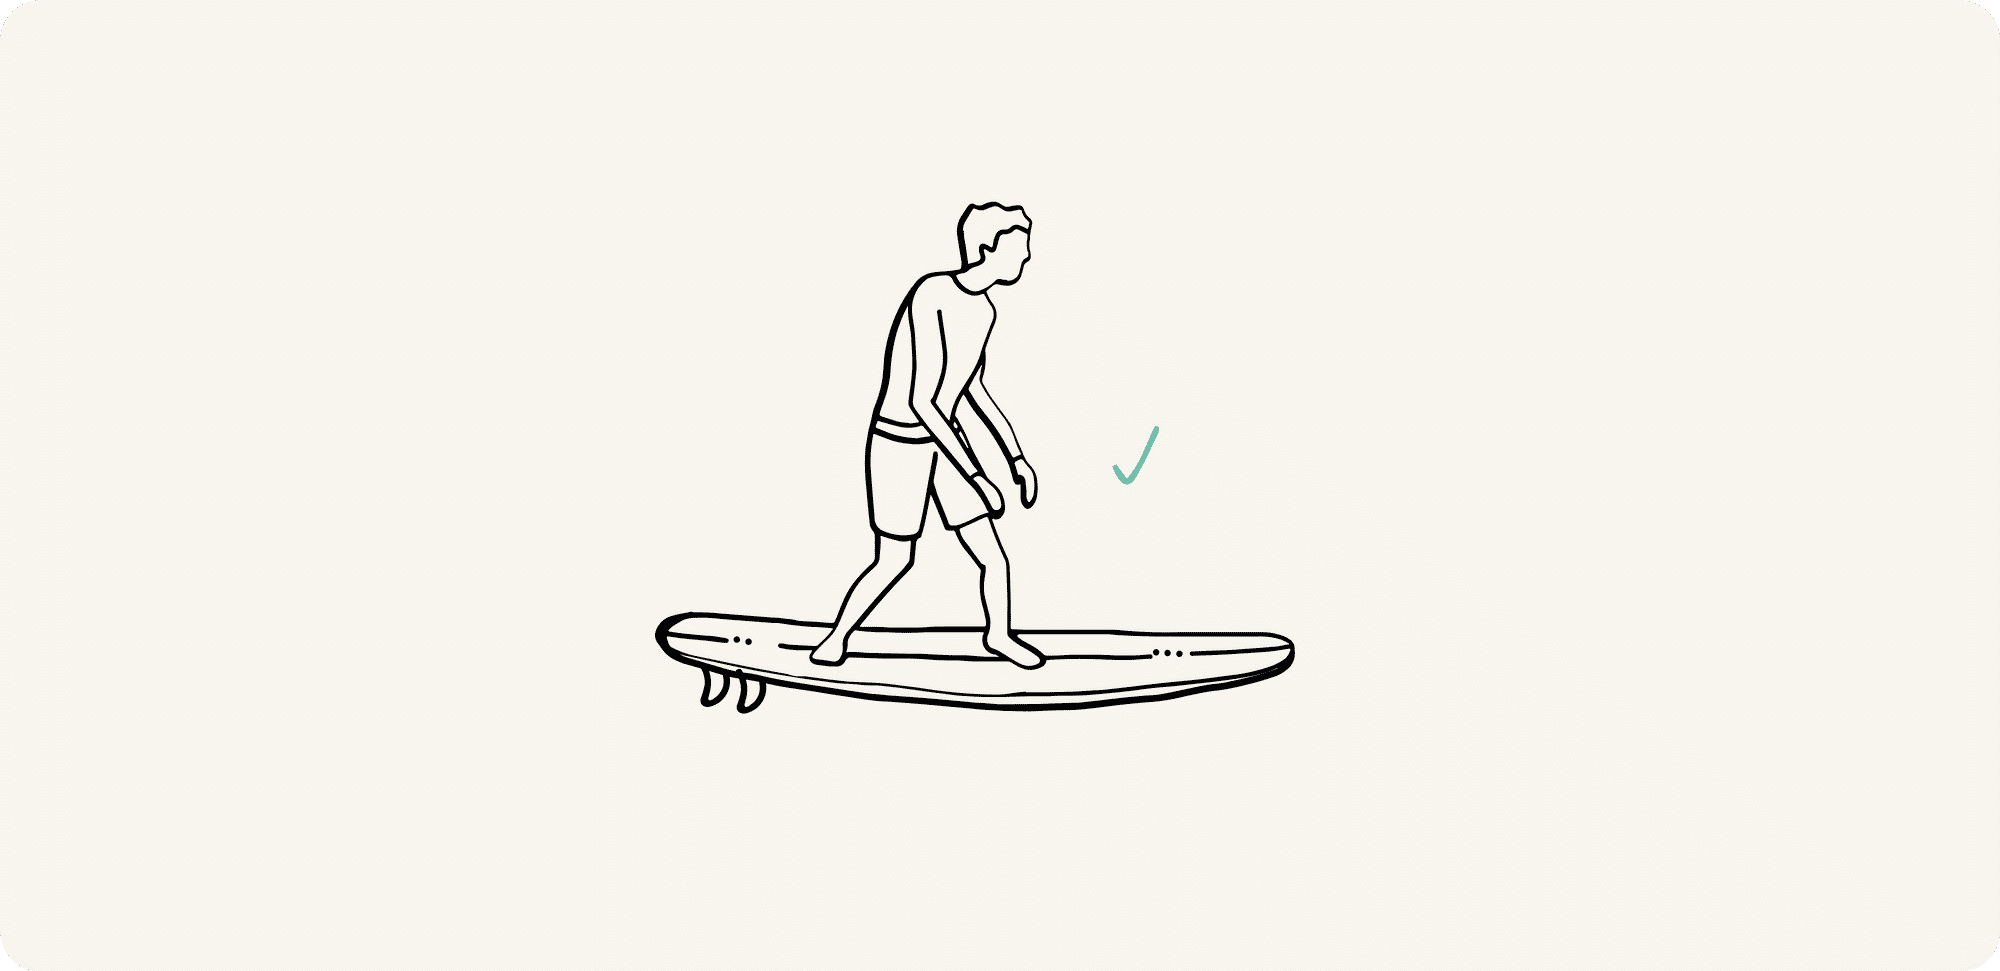 What size surfboard should I get for my height and weight?